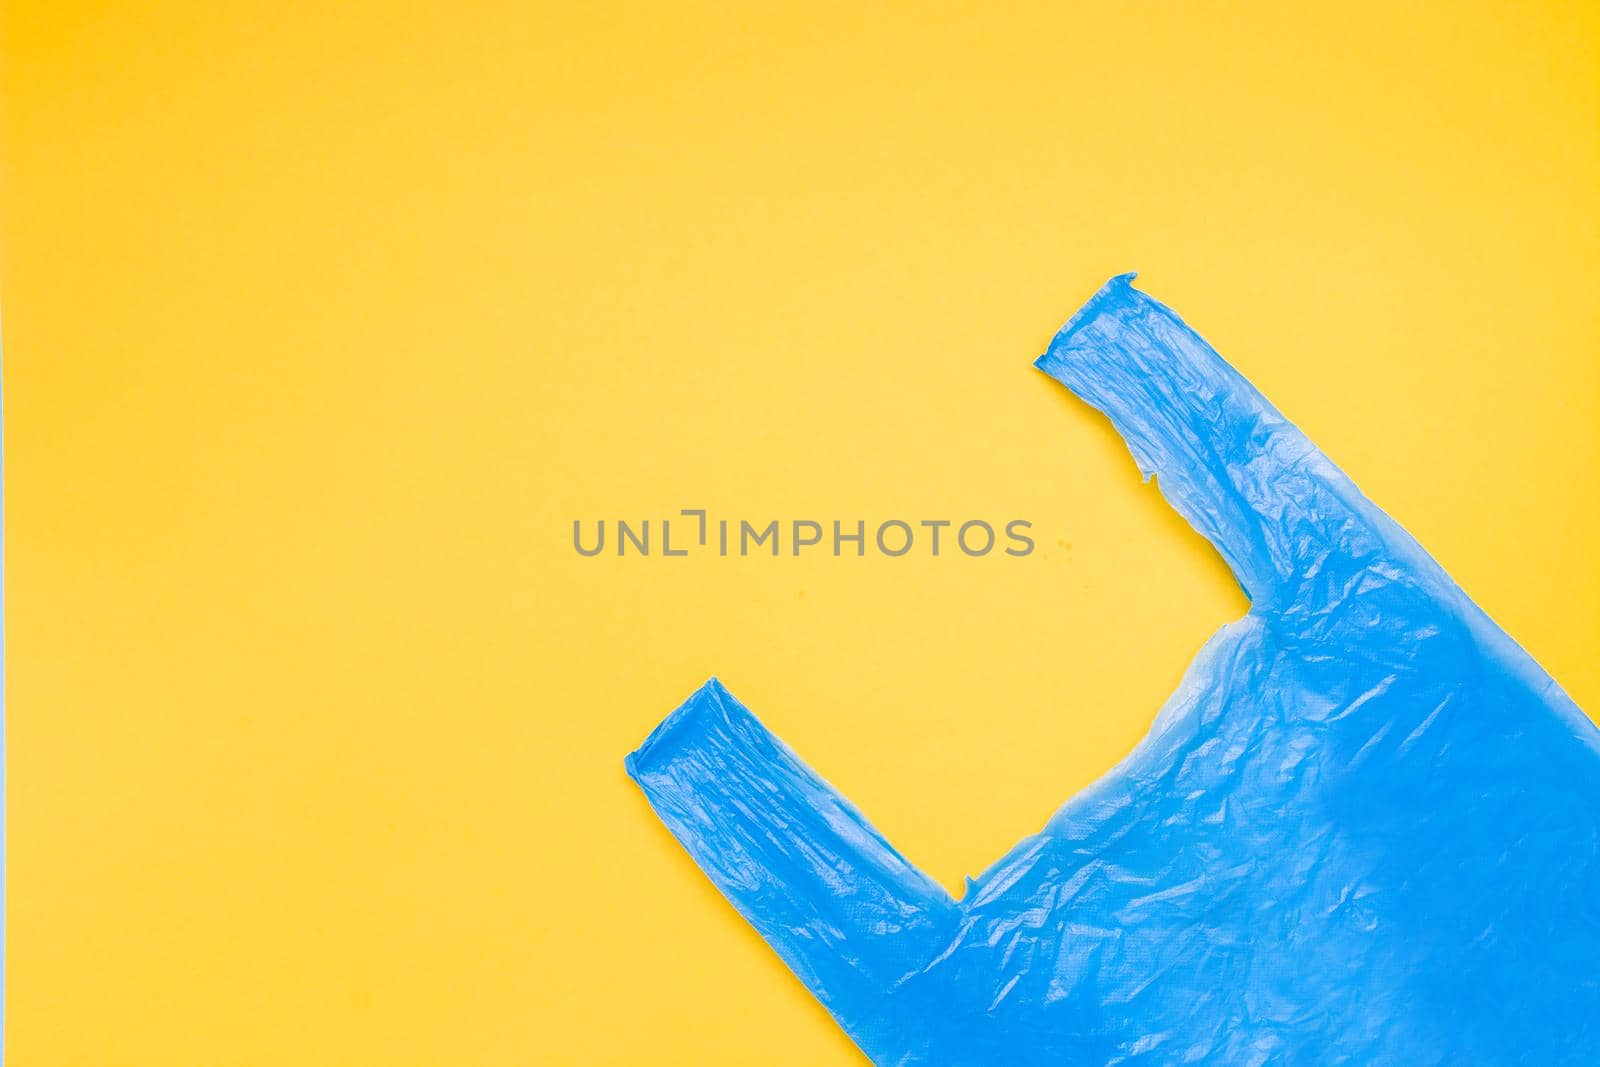 blue plastic bag in the corner on a yellow background, copy space, top view, zero waste concept, nature pollution stop